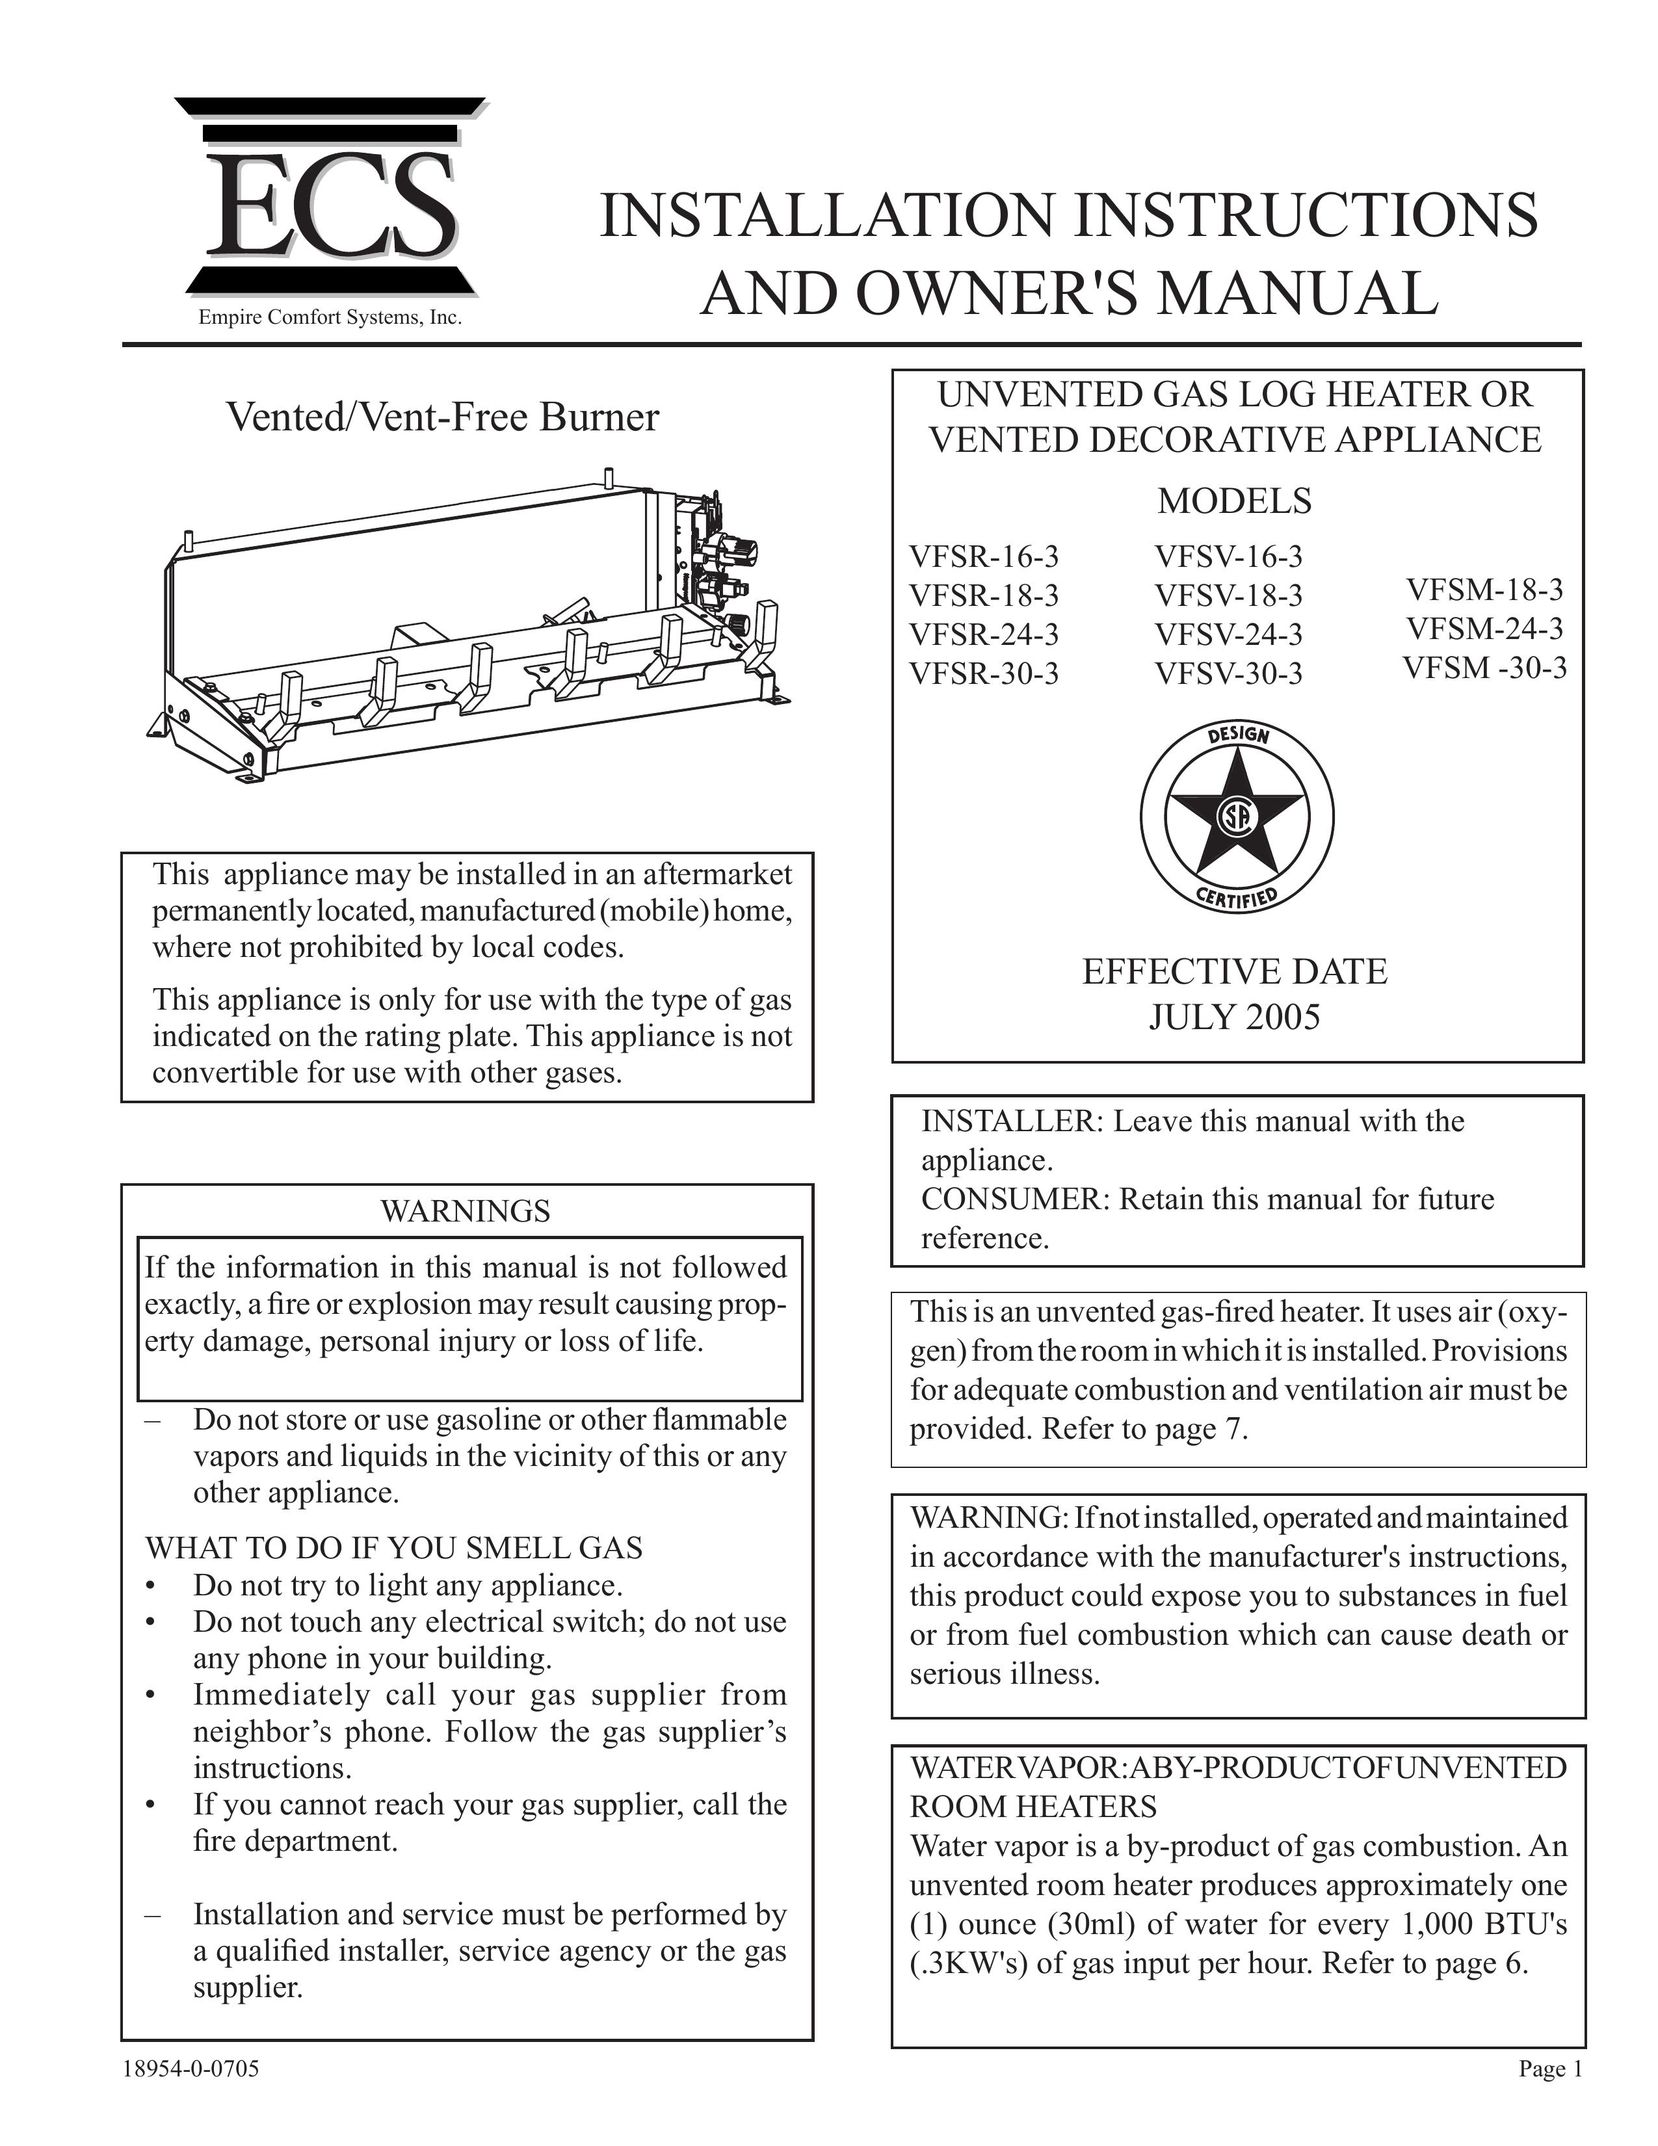 Empire Comfort Systems VFSM -30-3 Electric Heater User Manual